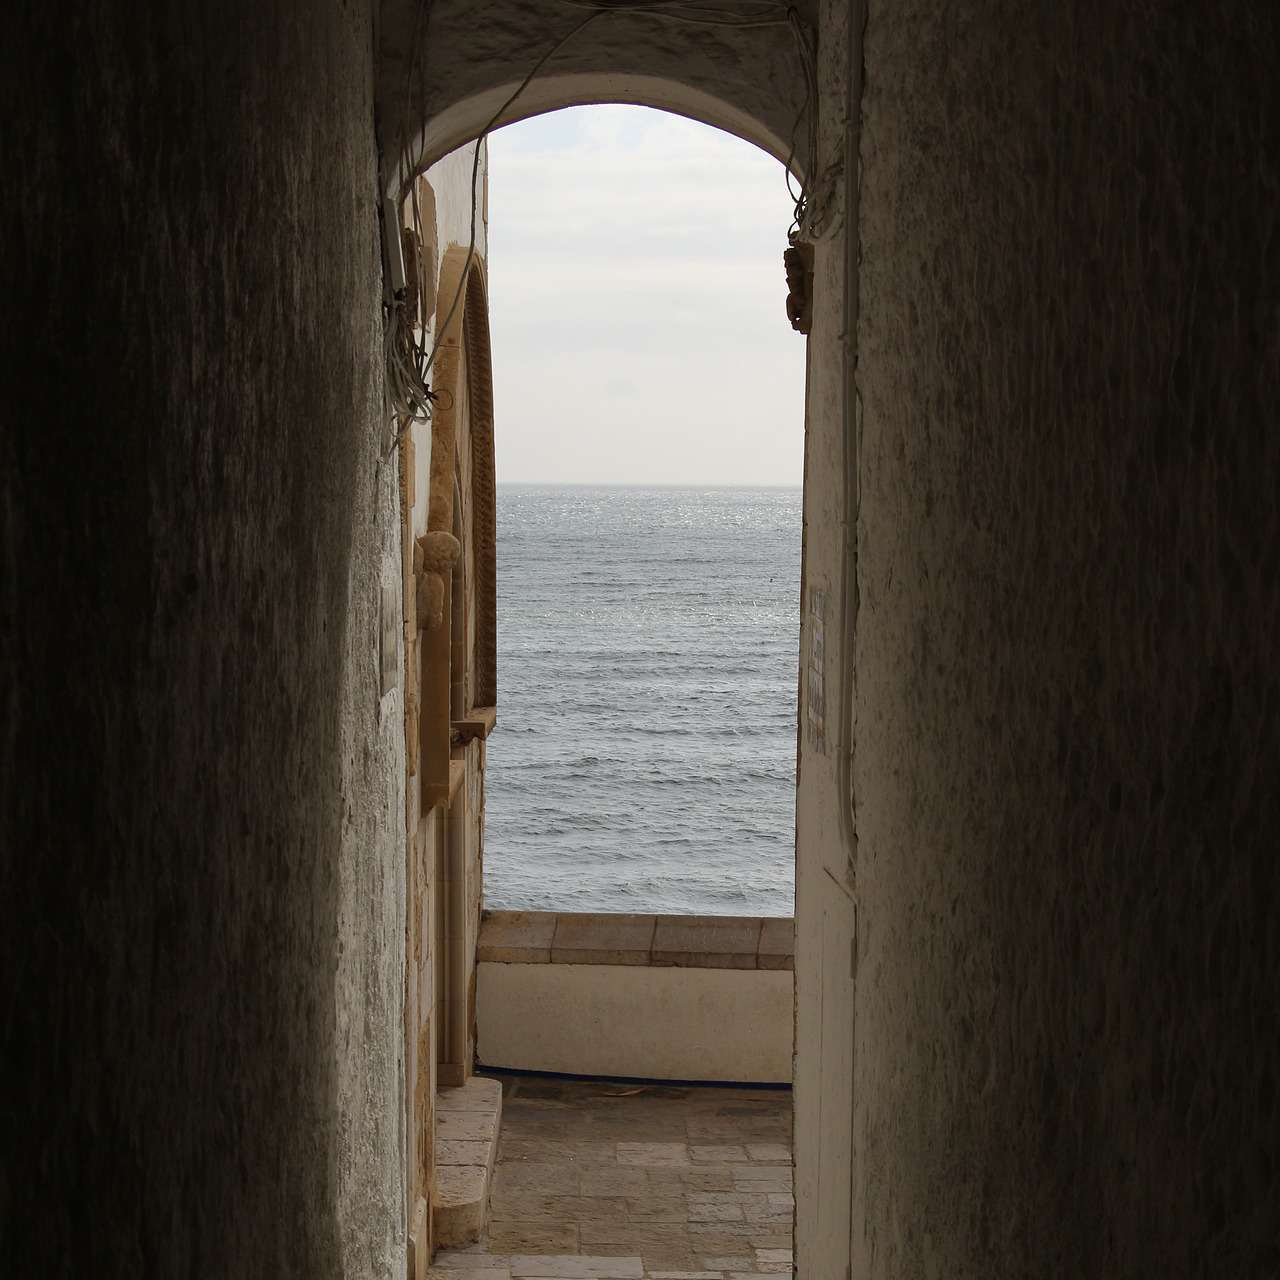 A photo of a doorway overlooking the sea.